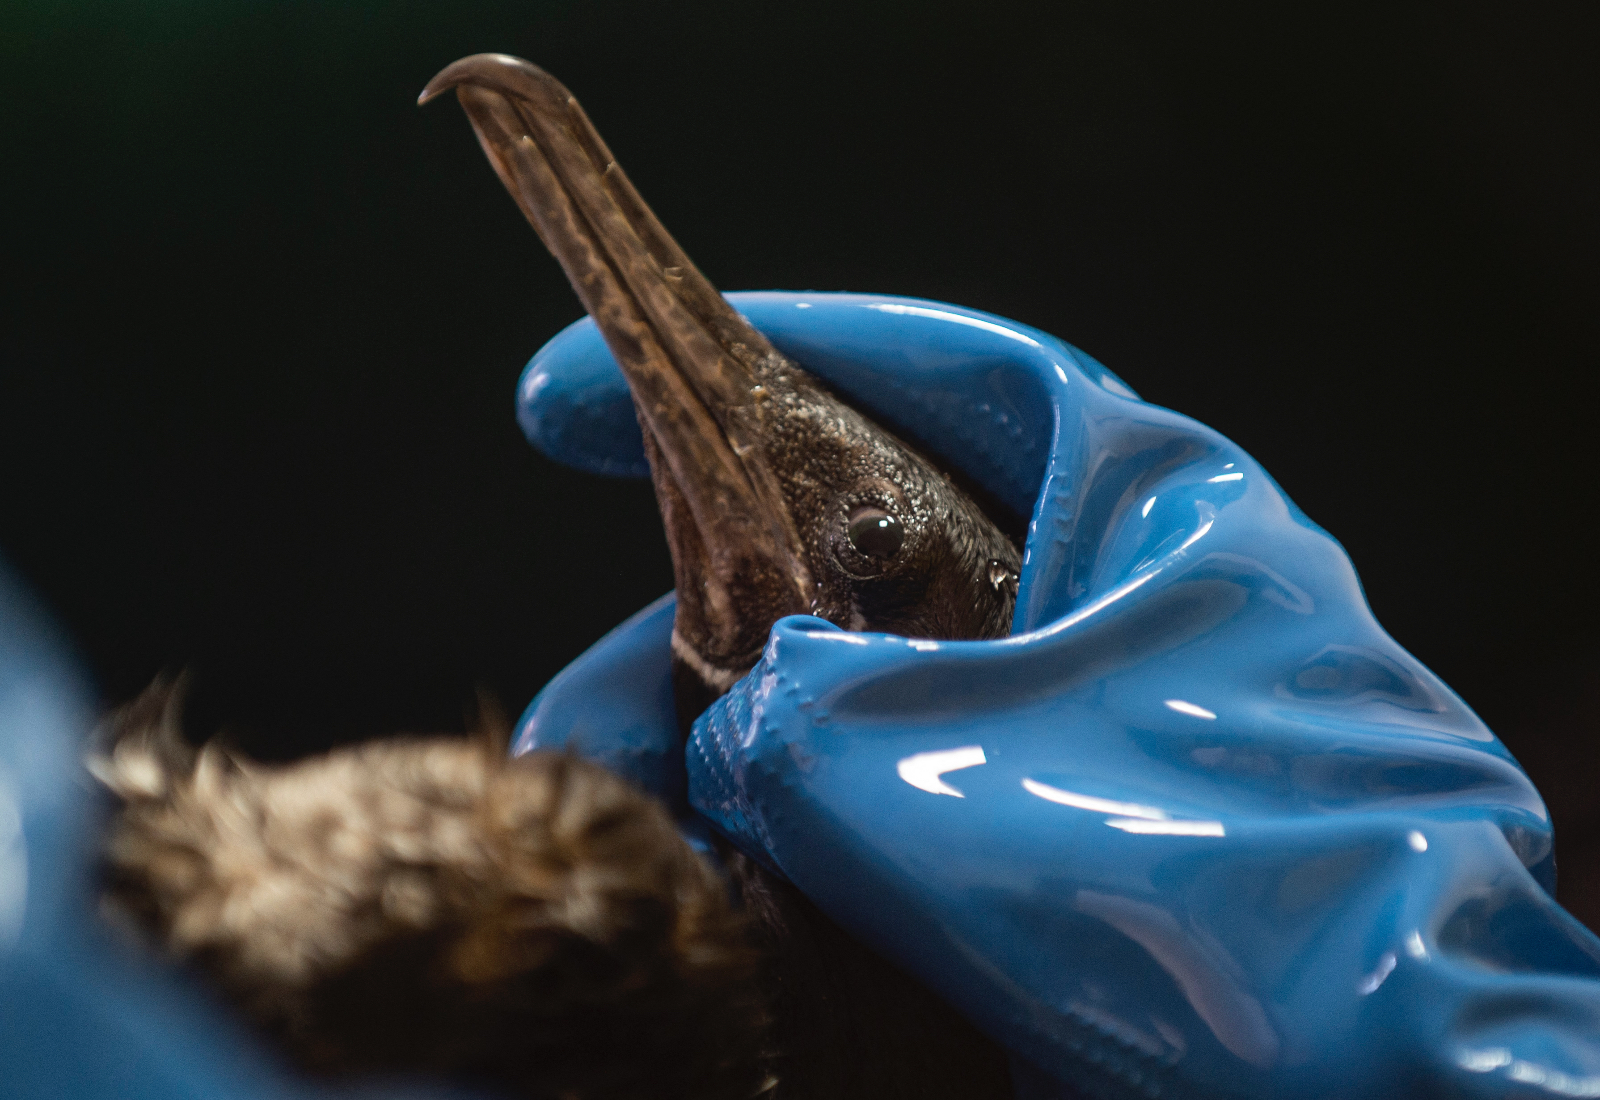 An oil-covered cormorant held by a hand in a blue glove